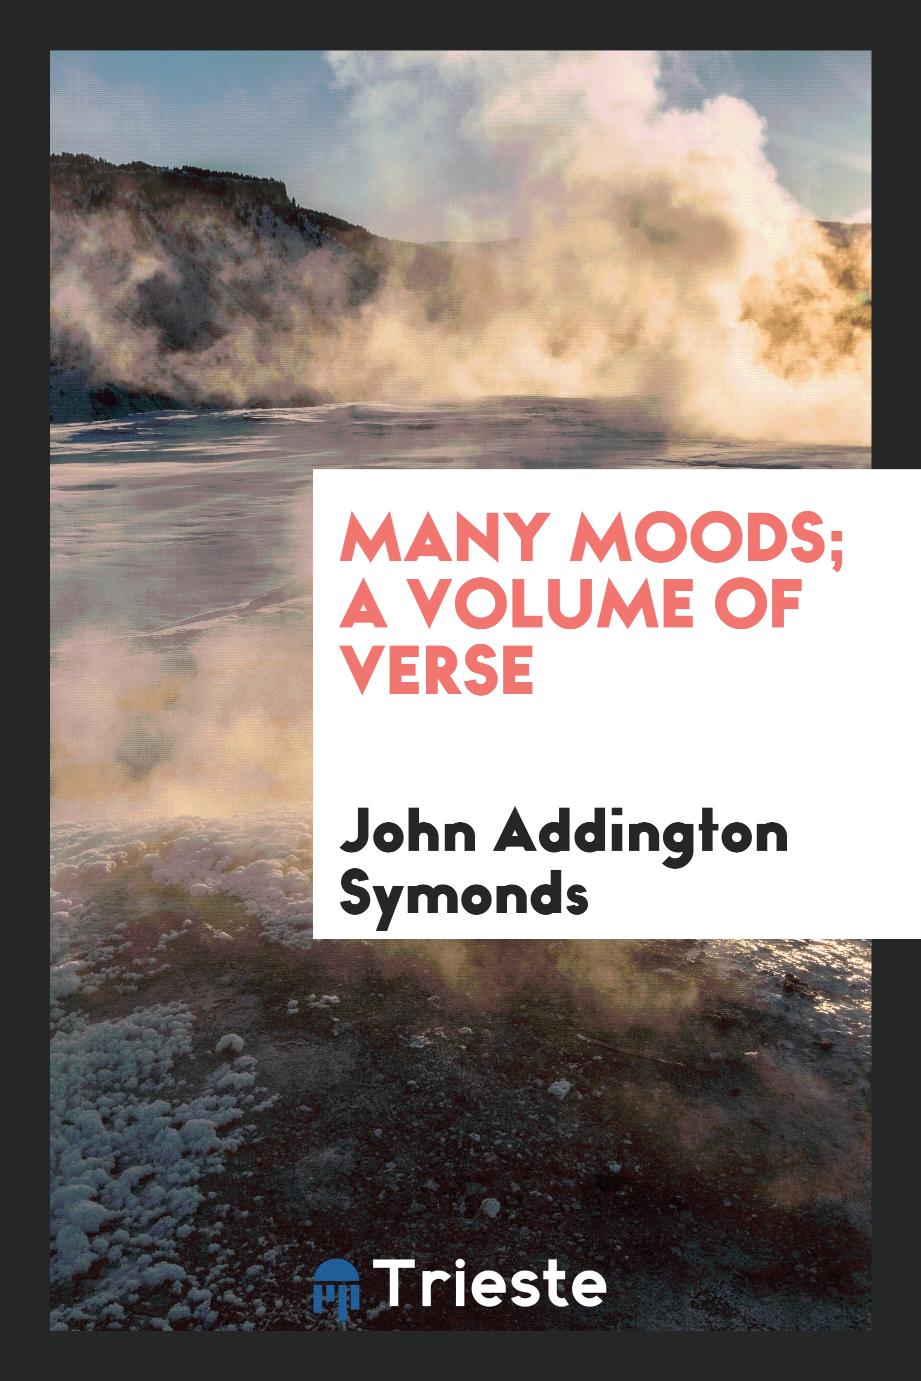 Many moods; a volume of verse